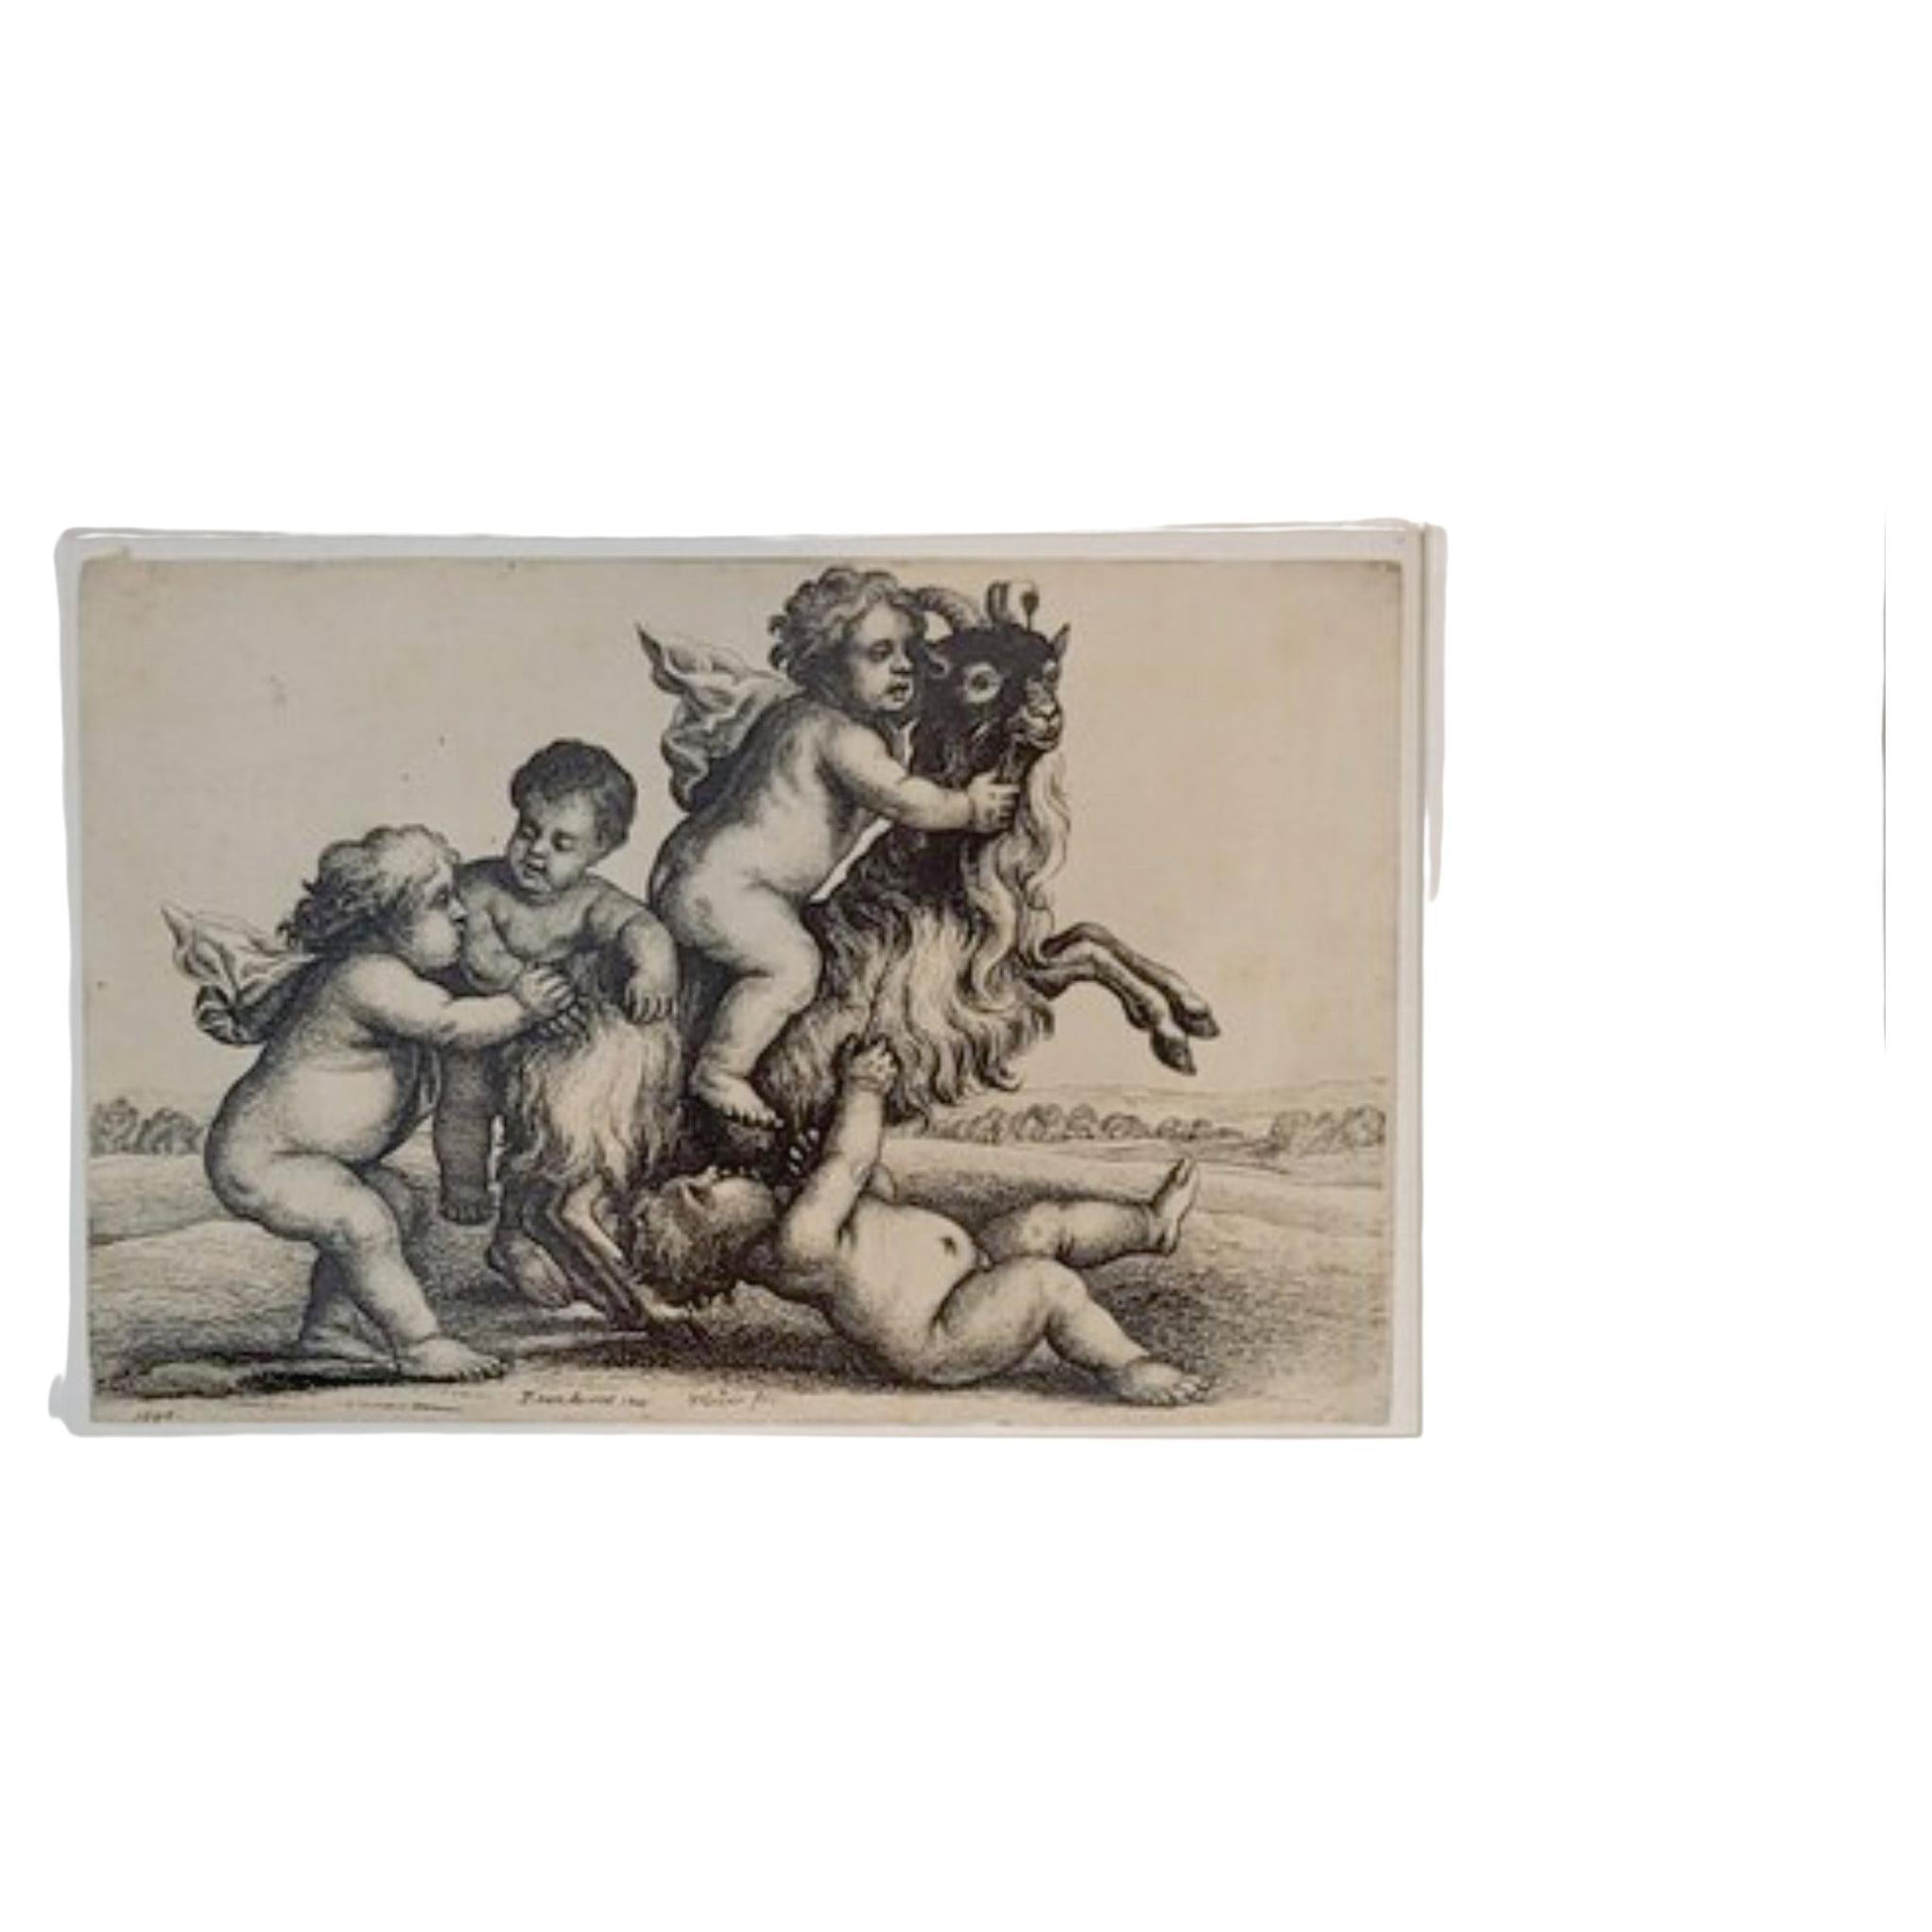 Wenceslaus Hollar lifetime etching on laid paper of "Putti with Goat" 1607-1677